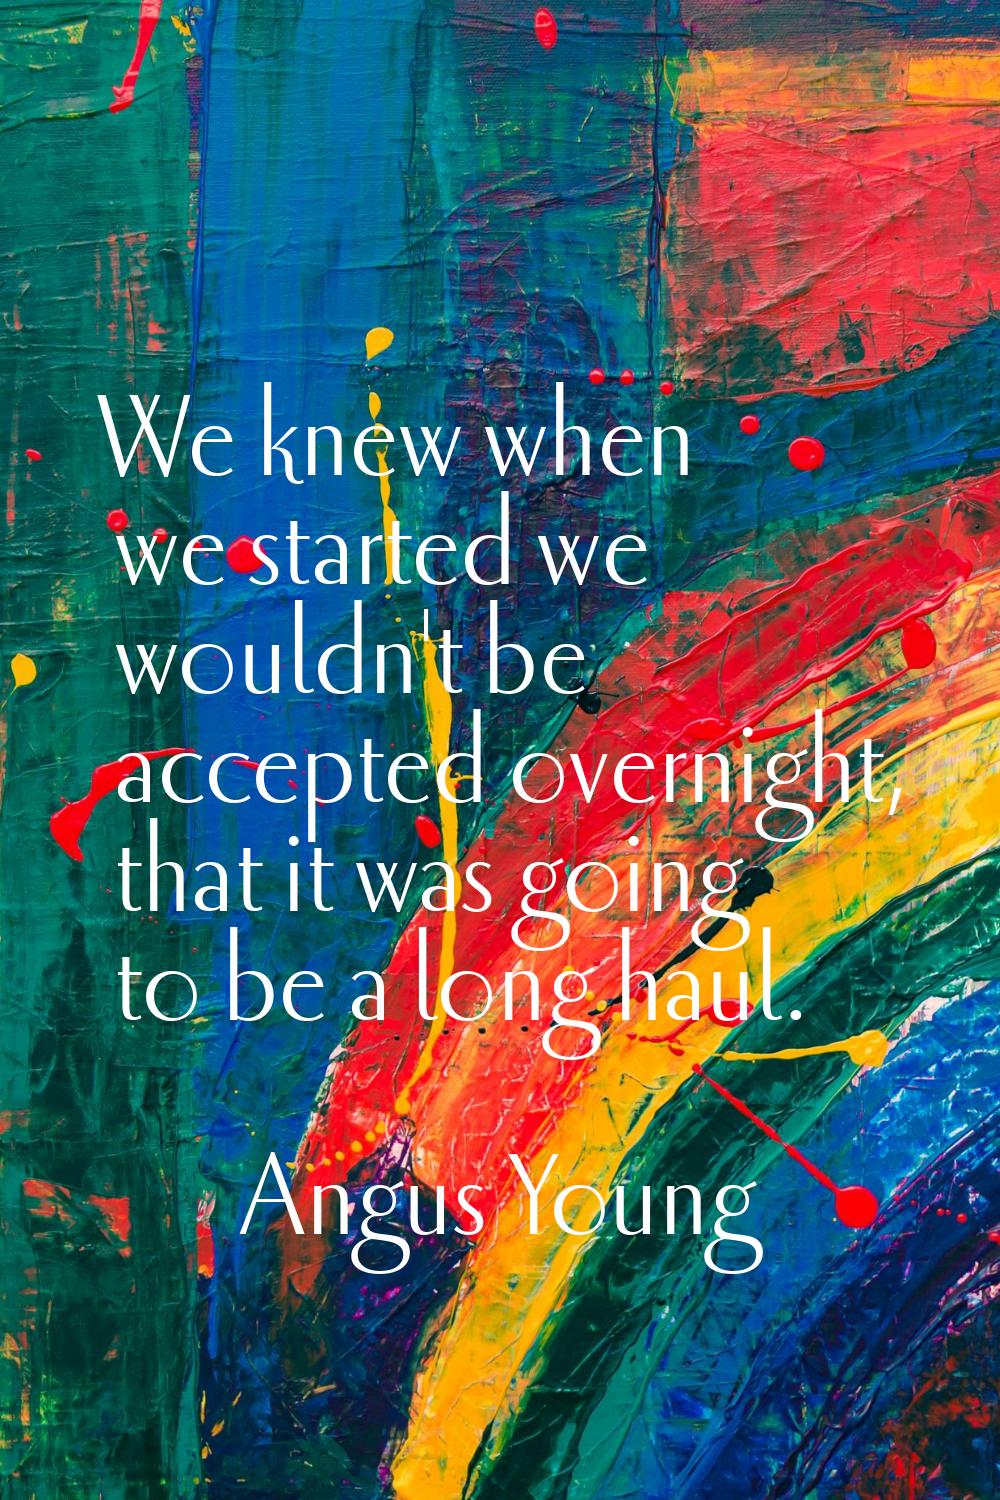 We knew when we started we wouldn't be accepted overnight, that it was going to be a long haul.